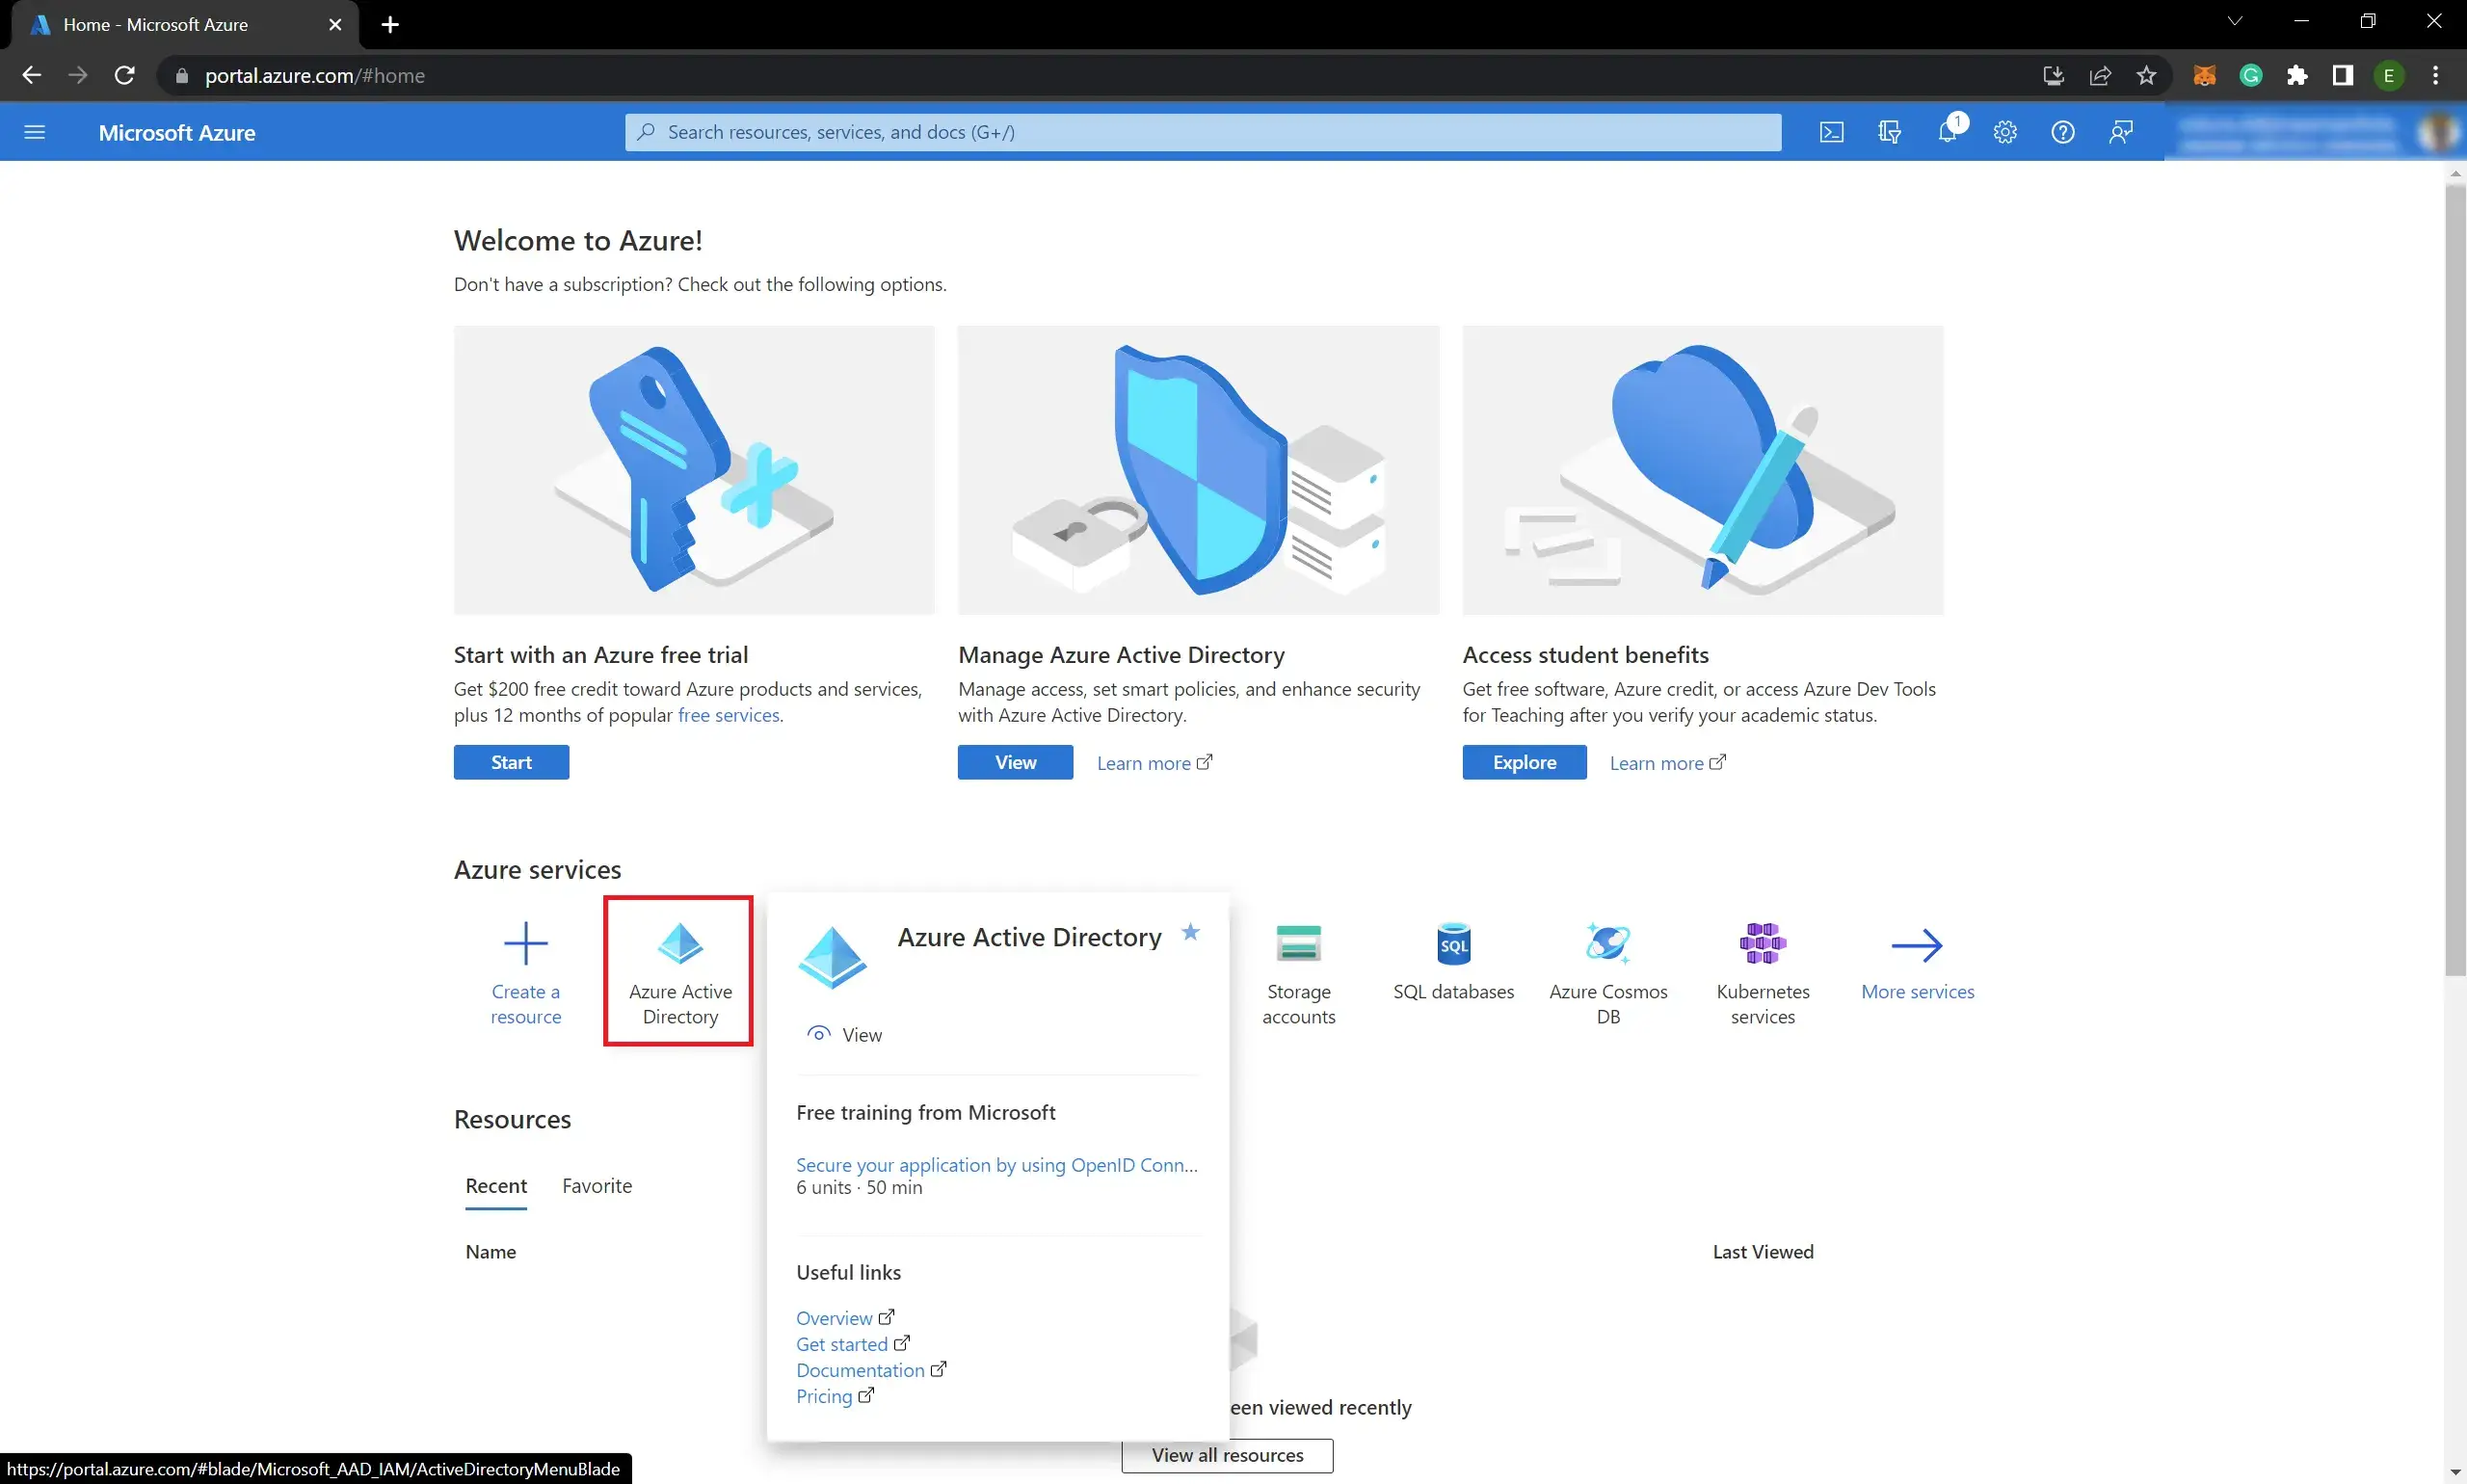 How to create a Azure Active Directory